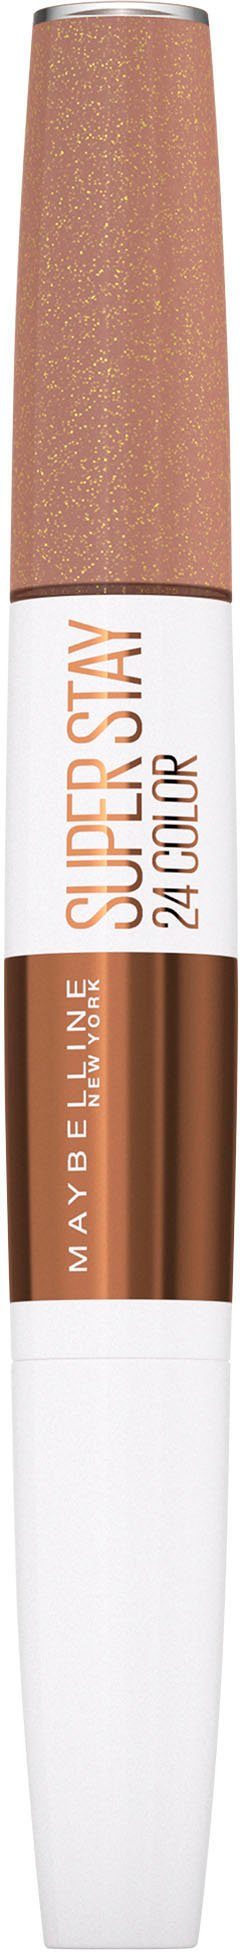 MAYBELLINE NEW YORK 885 Super Coffee Nr. Chai Stay More 24H Once Lippenstift